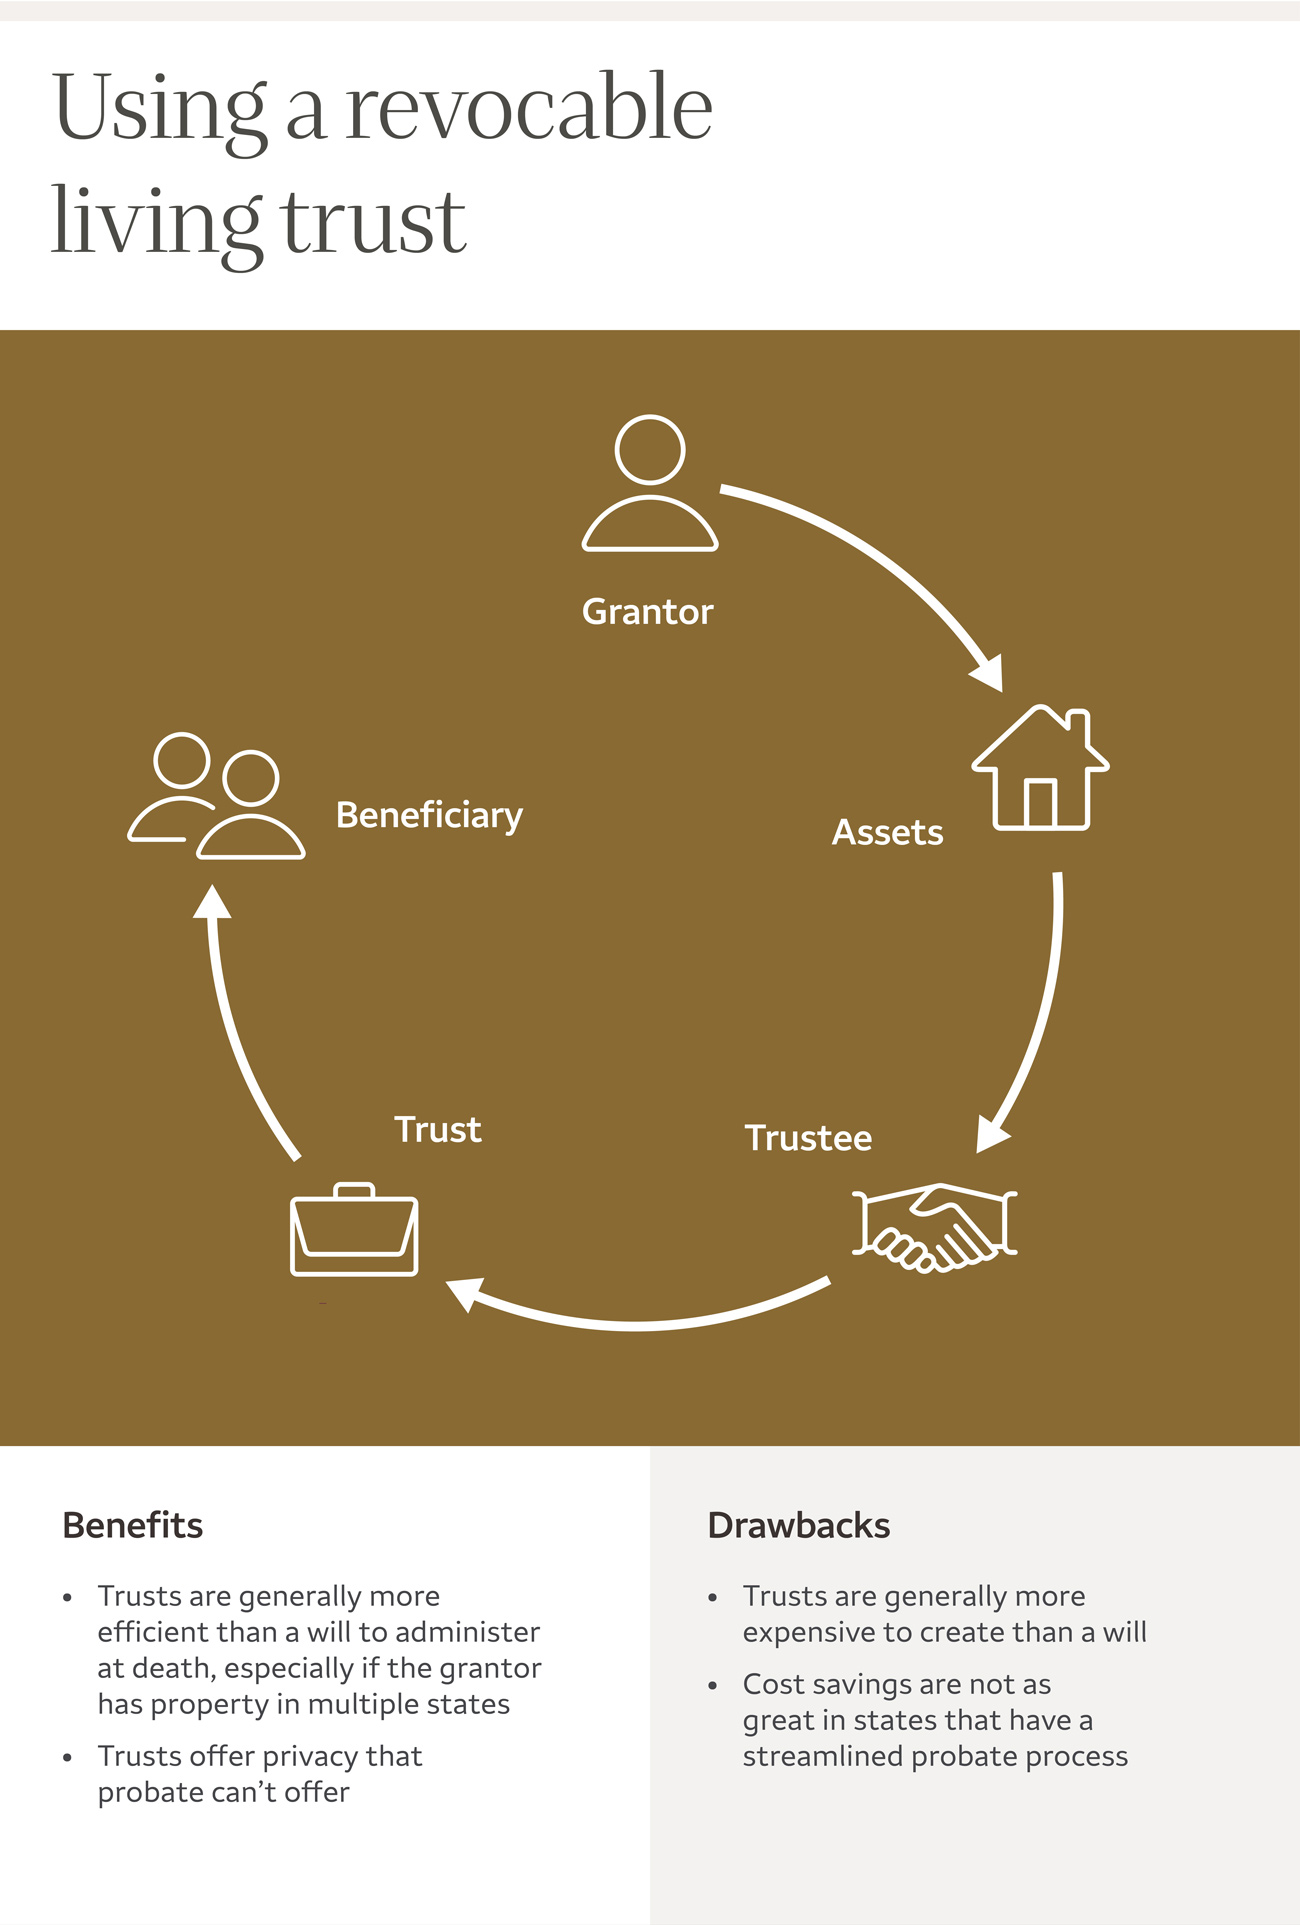 Infographic of wills and trusts plus how to use revocable living trust. For details, click "view text alternative."